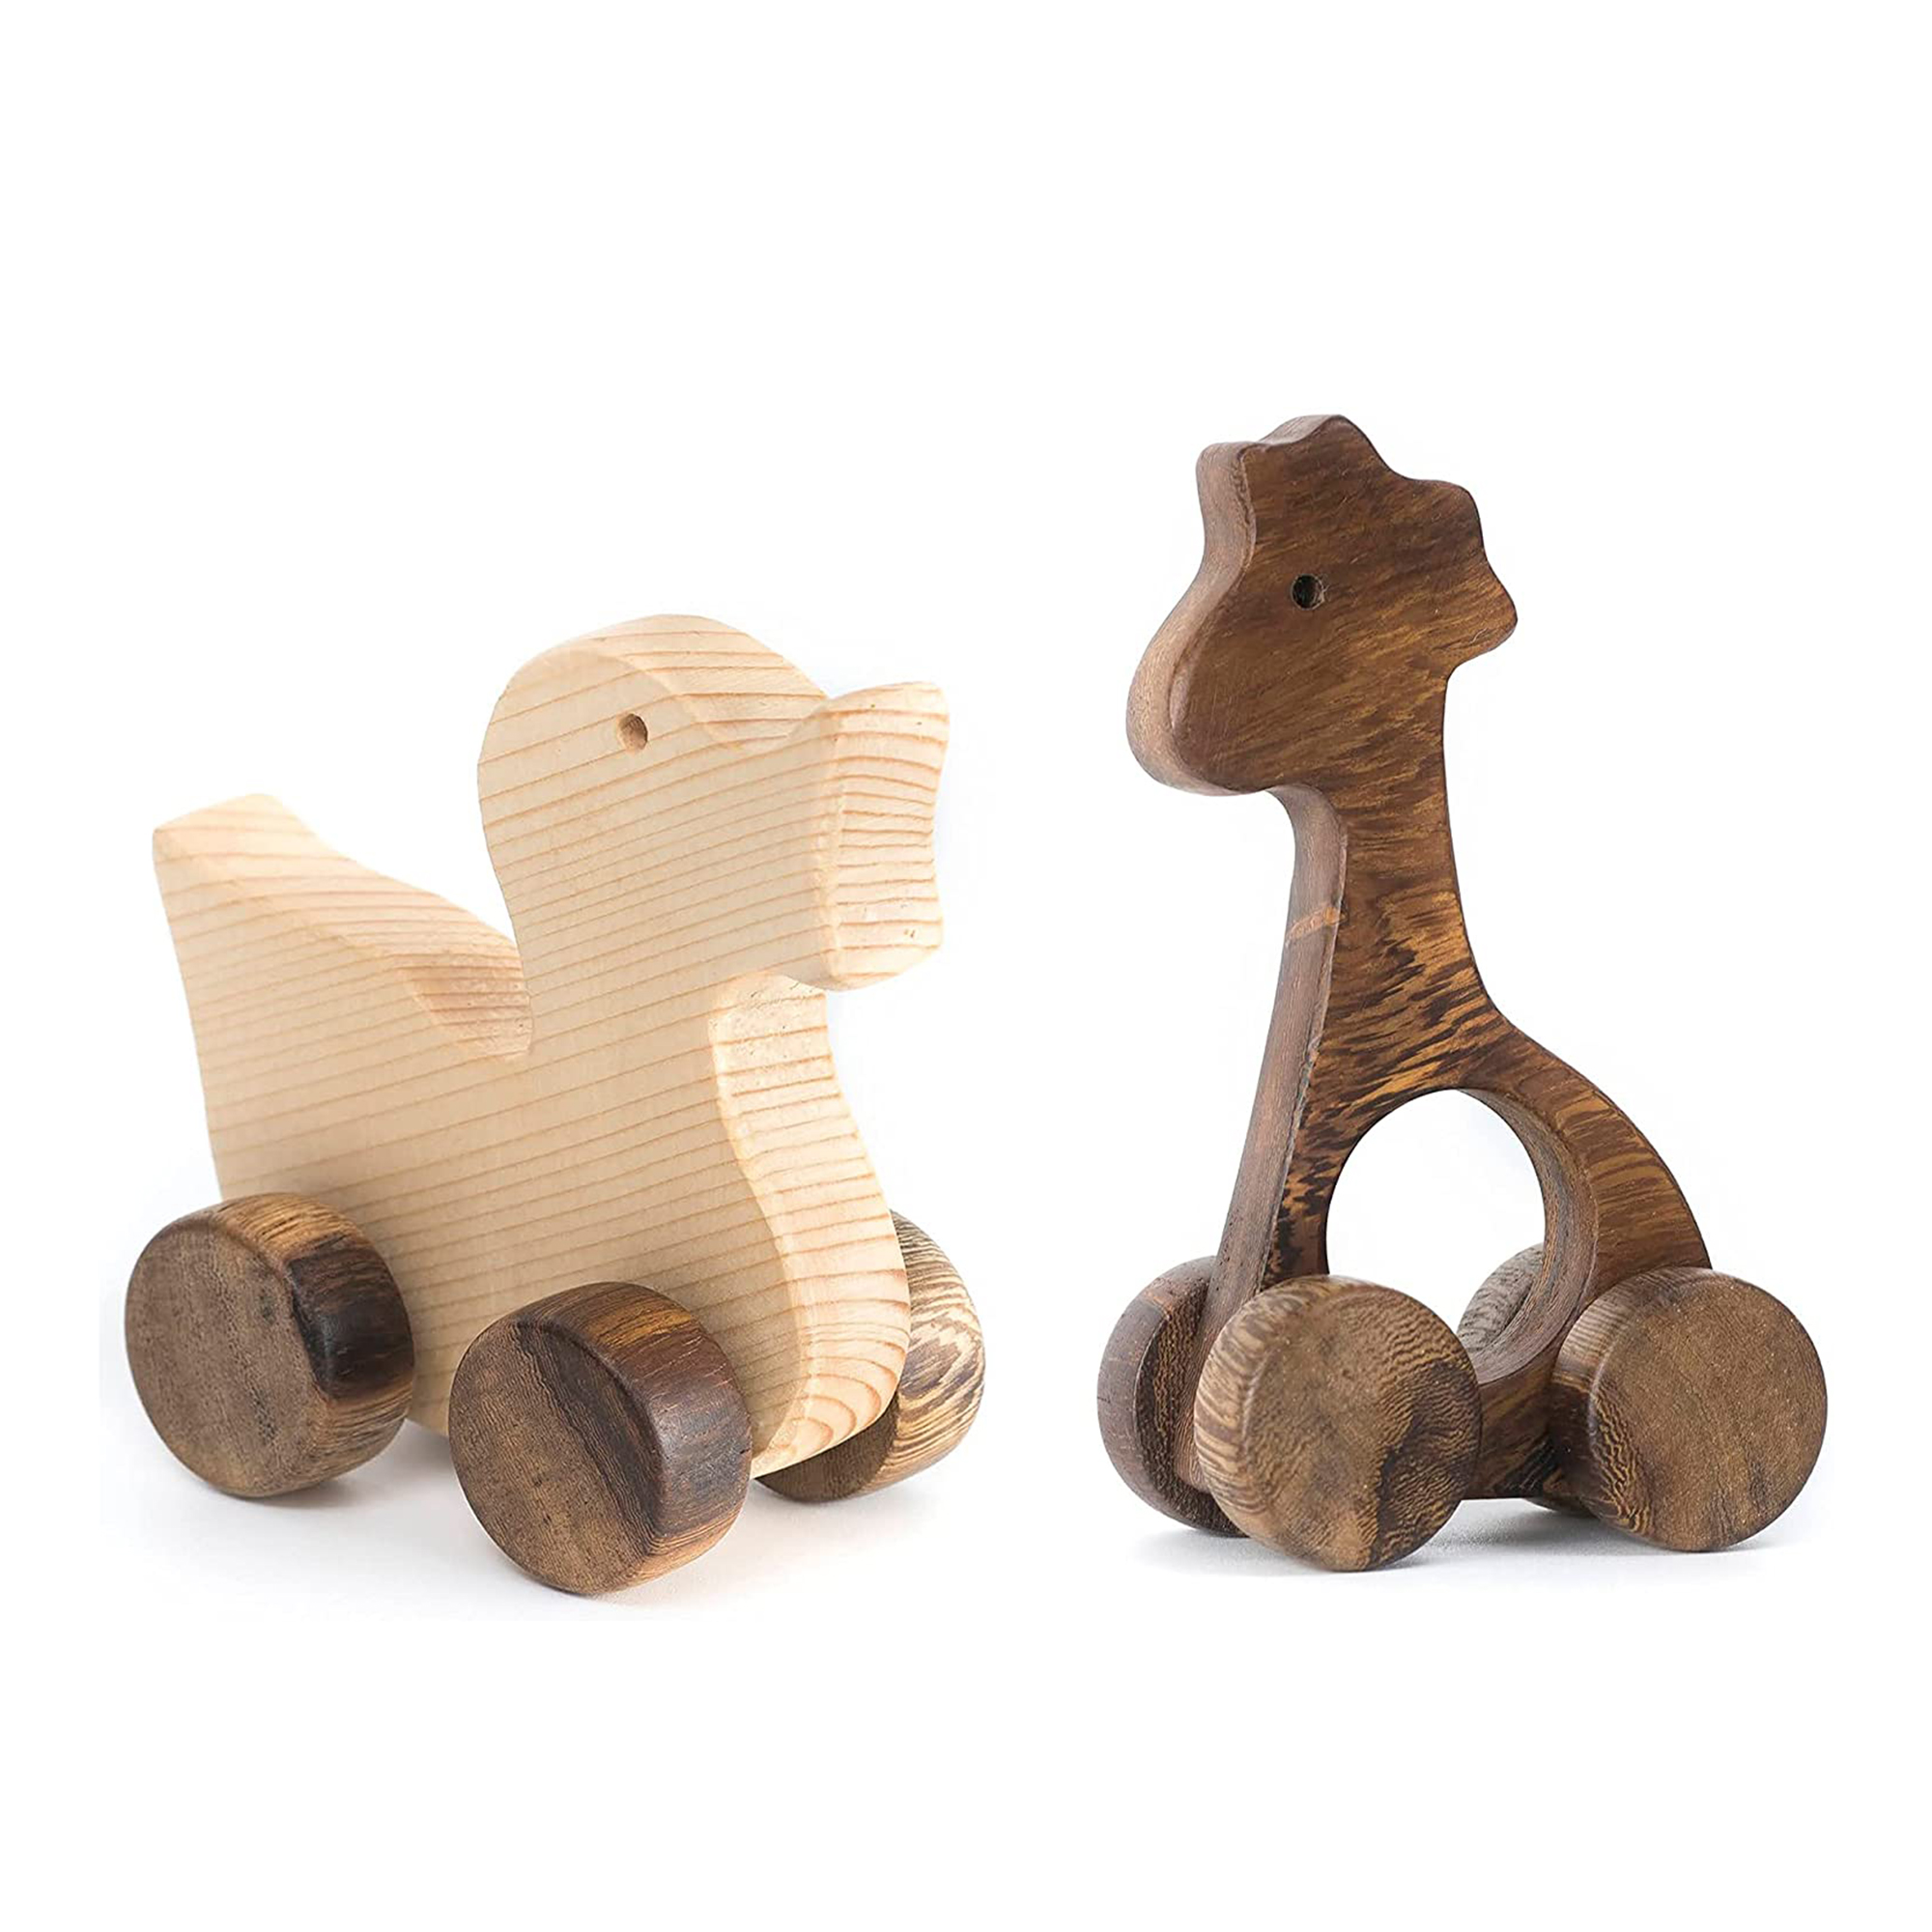 VINNY Unpainted Wooden Animal Cars for Toddlers 1 2 3 Years Old Boys Girls  (Duck and Giraffe) - VinnyToys